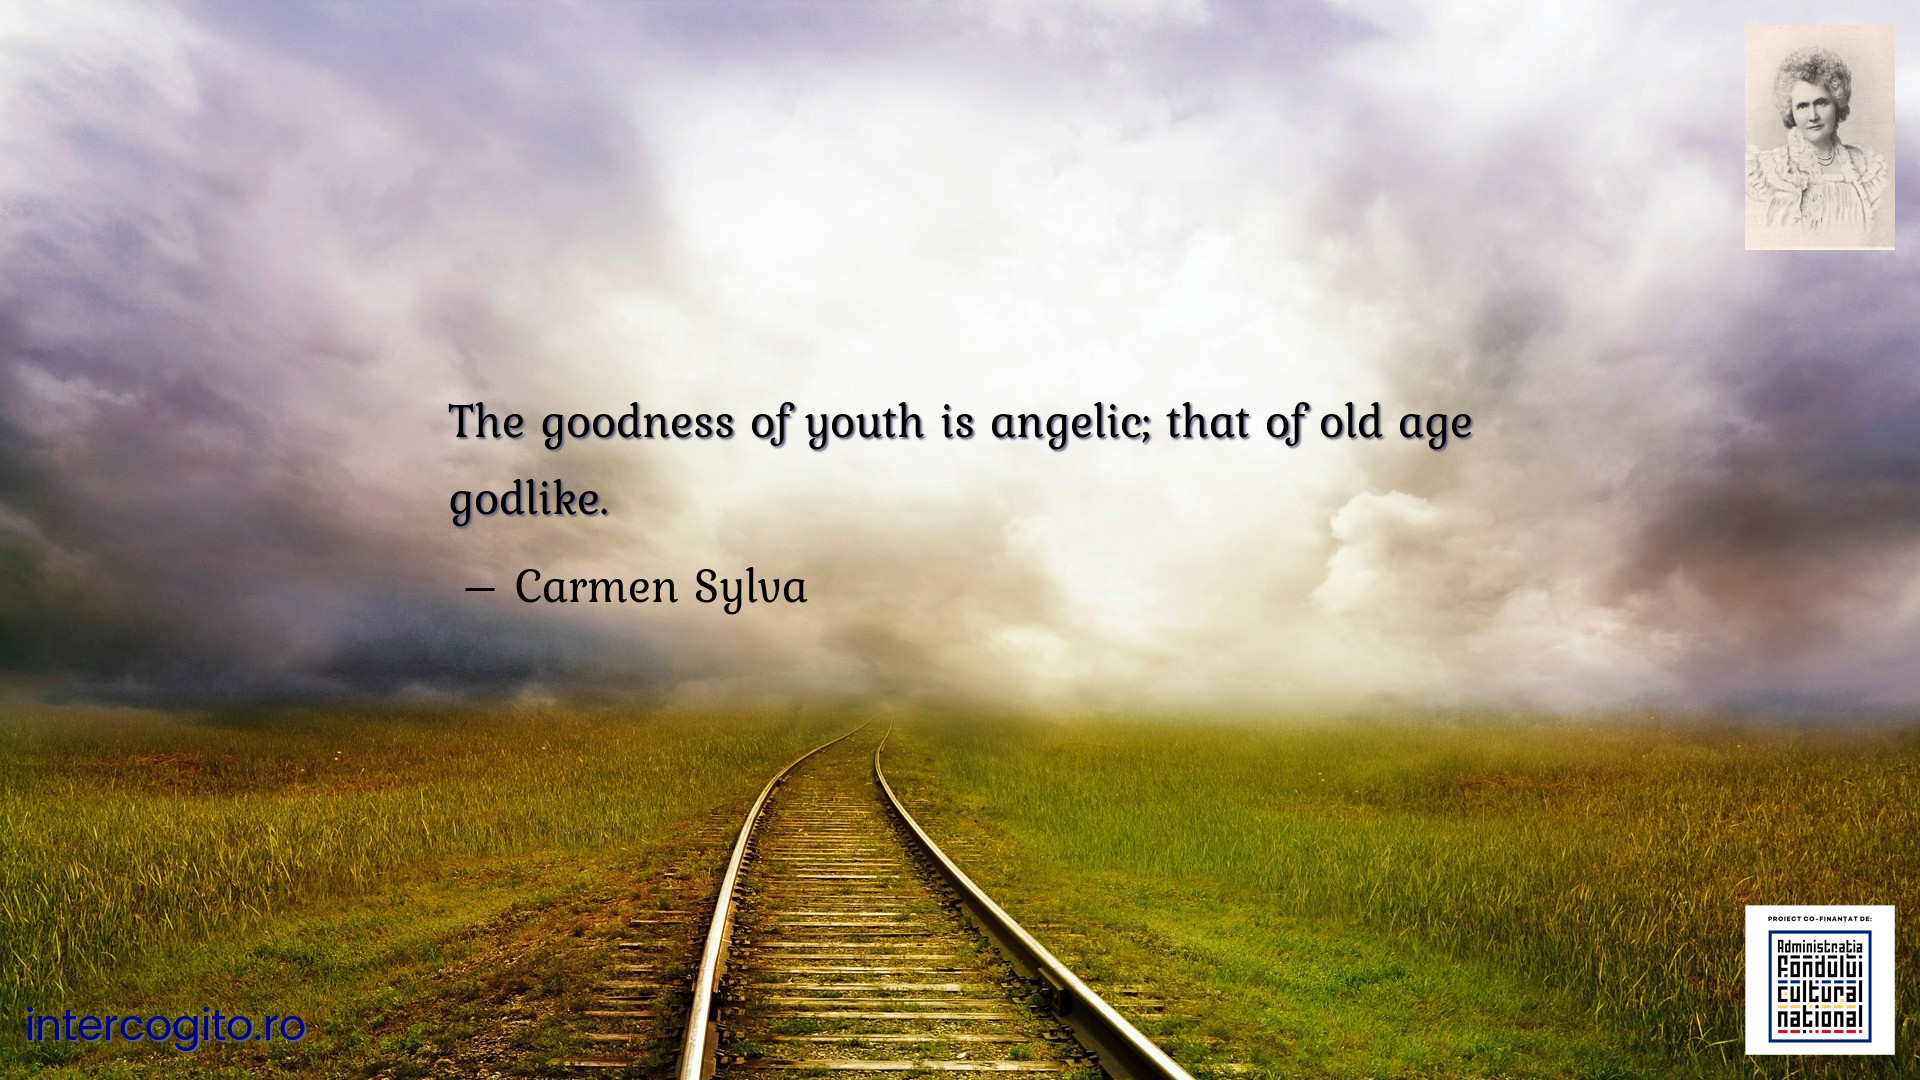 The goodness of youth is angelic; that of old age godlike.